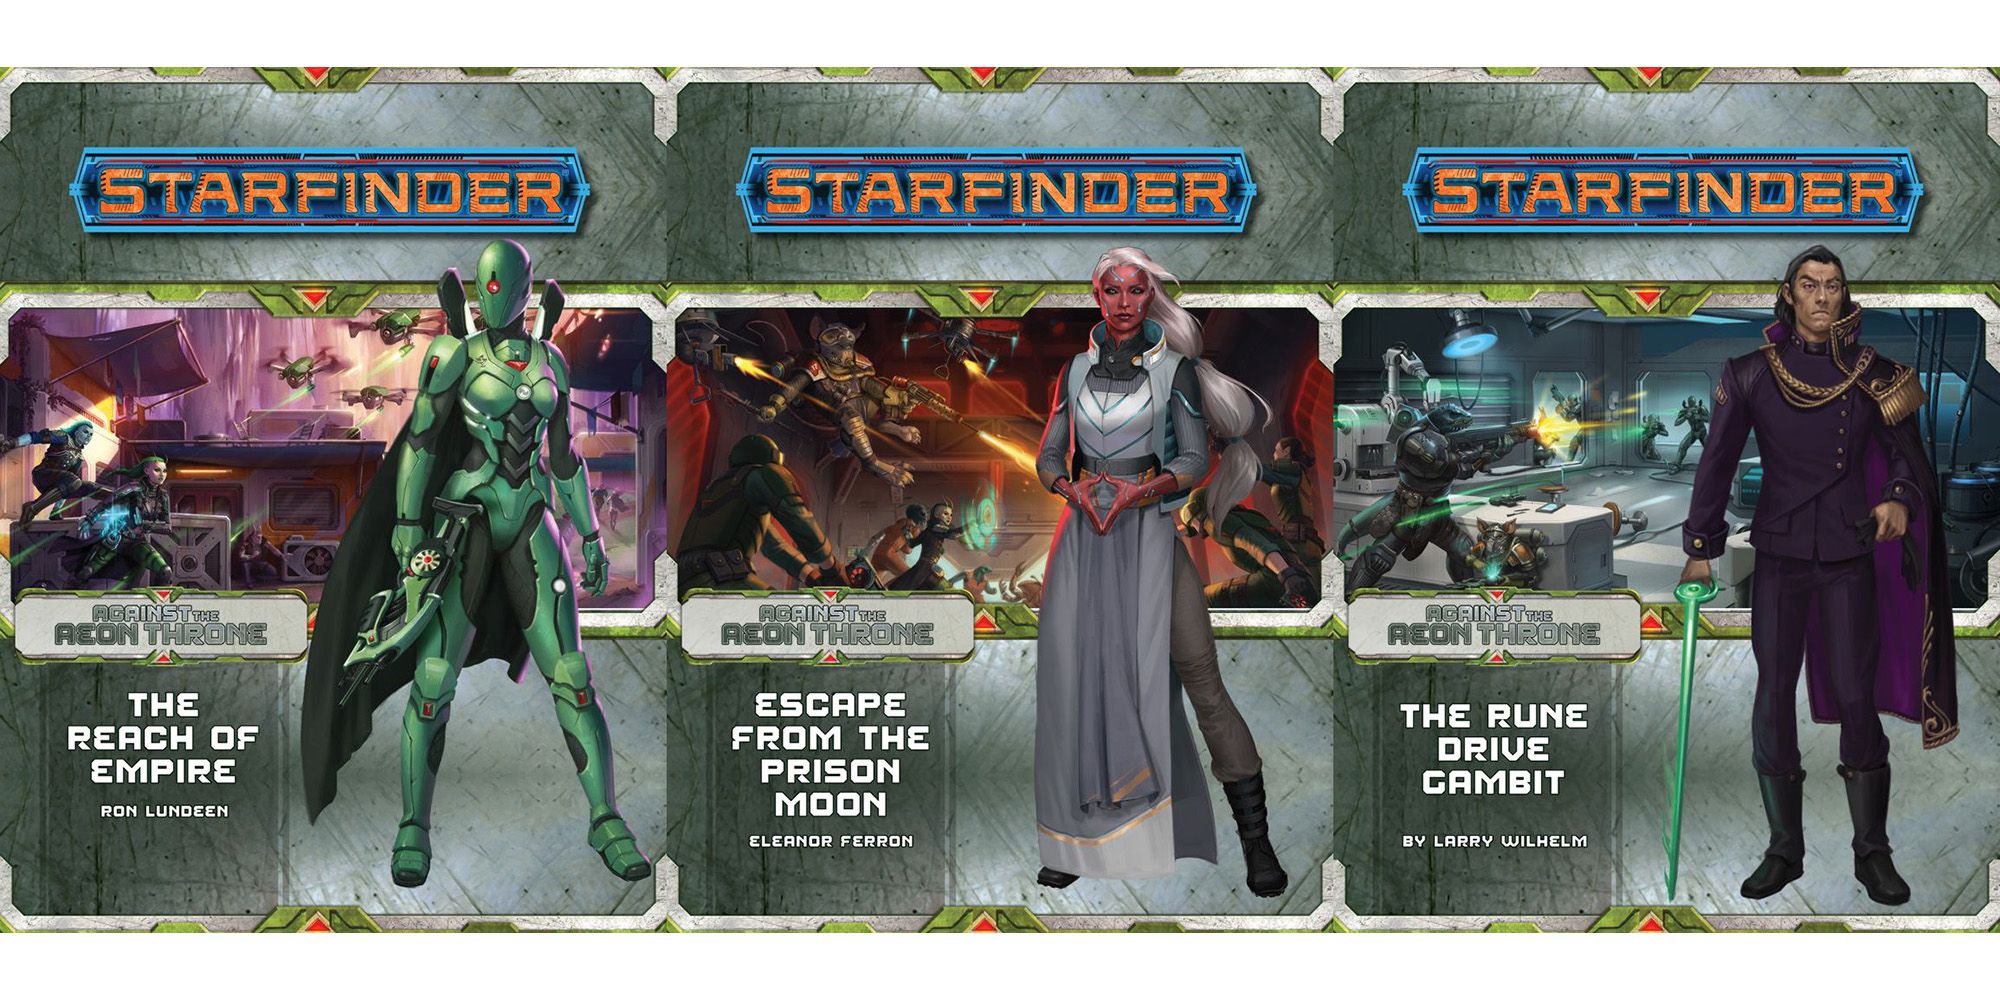 Three Starfinder books feature Sci-Fi battles on their covers